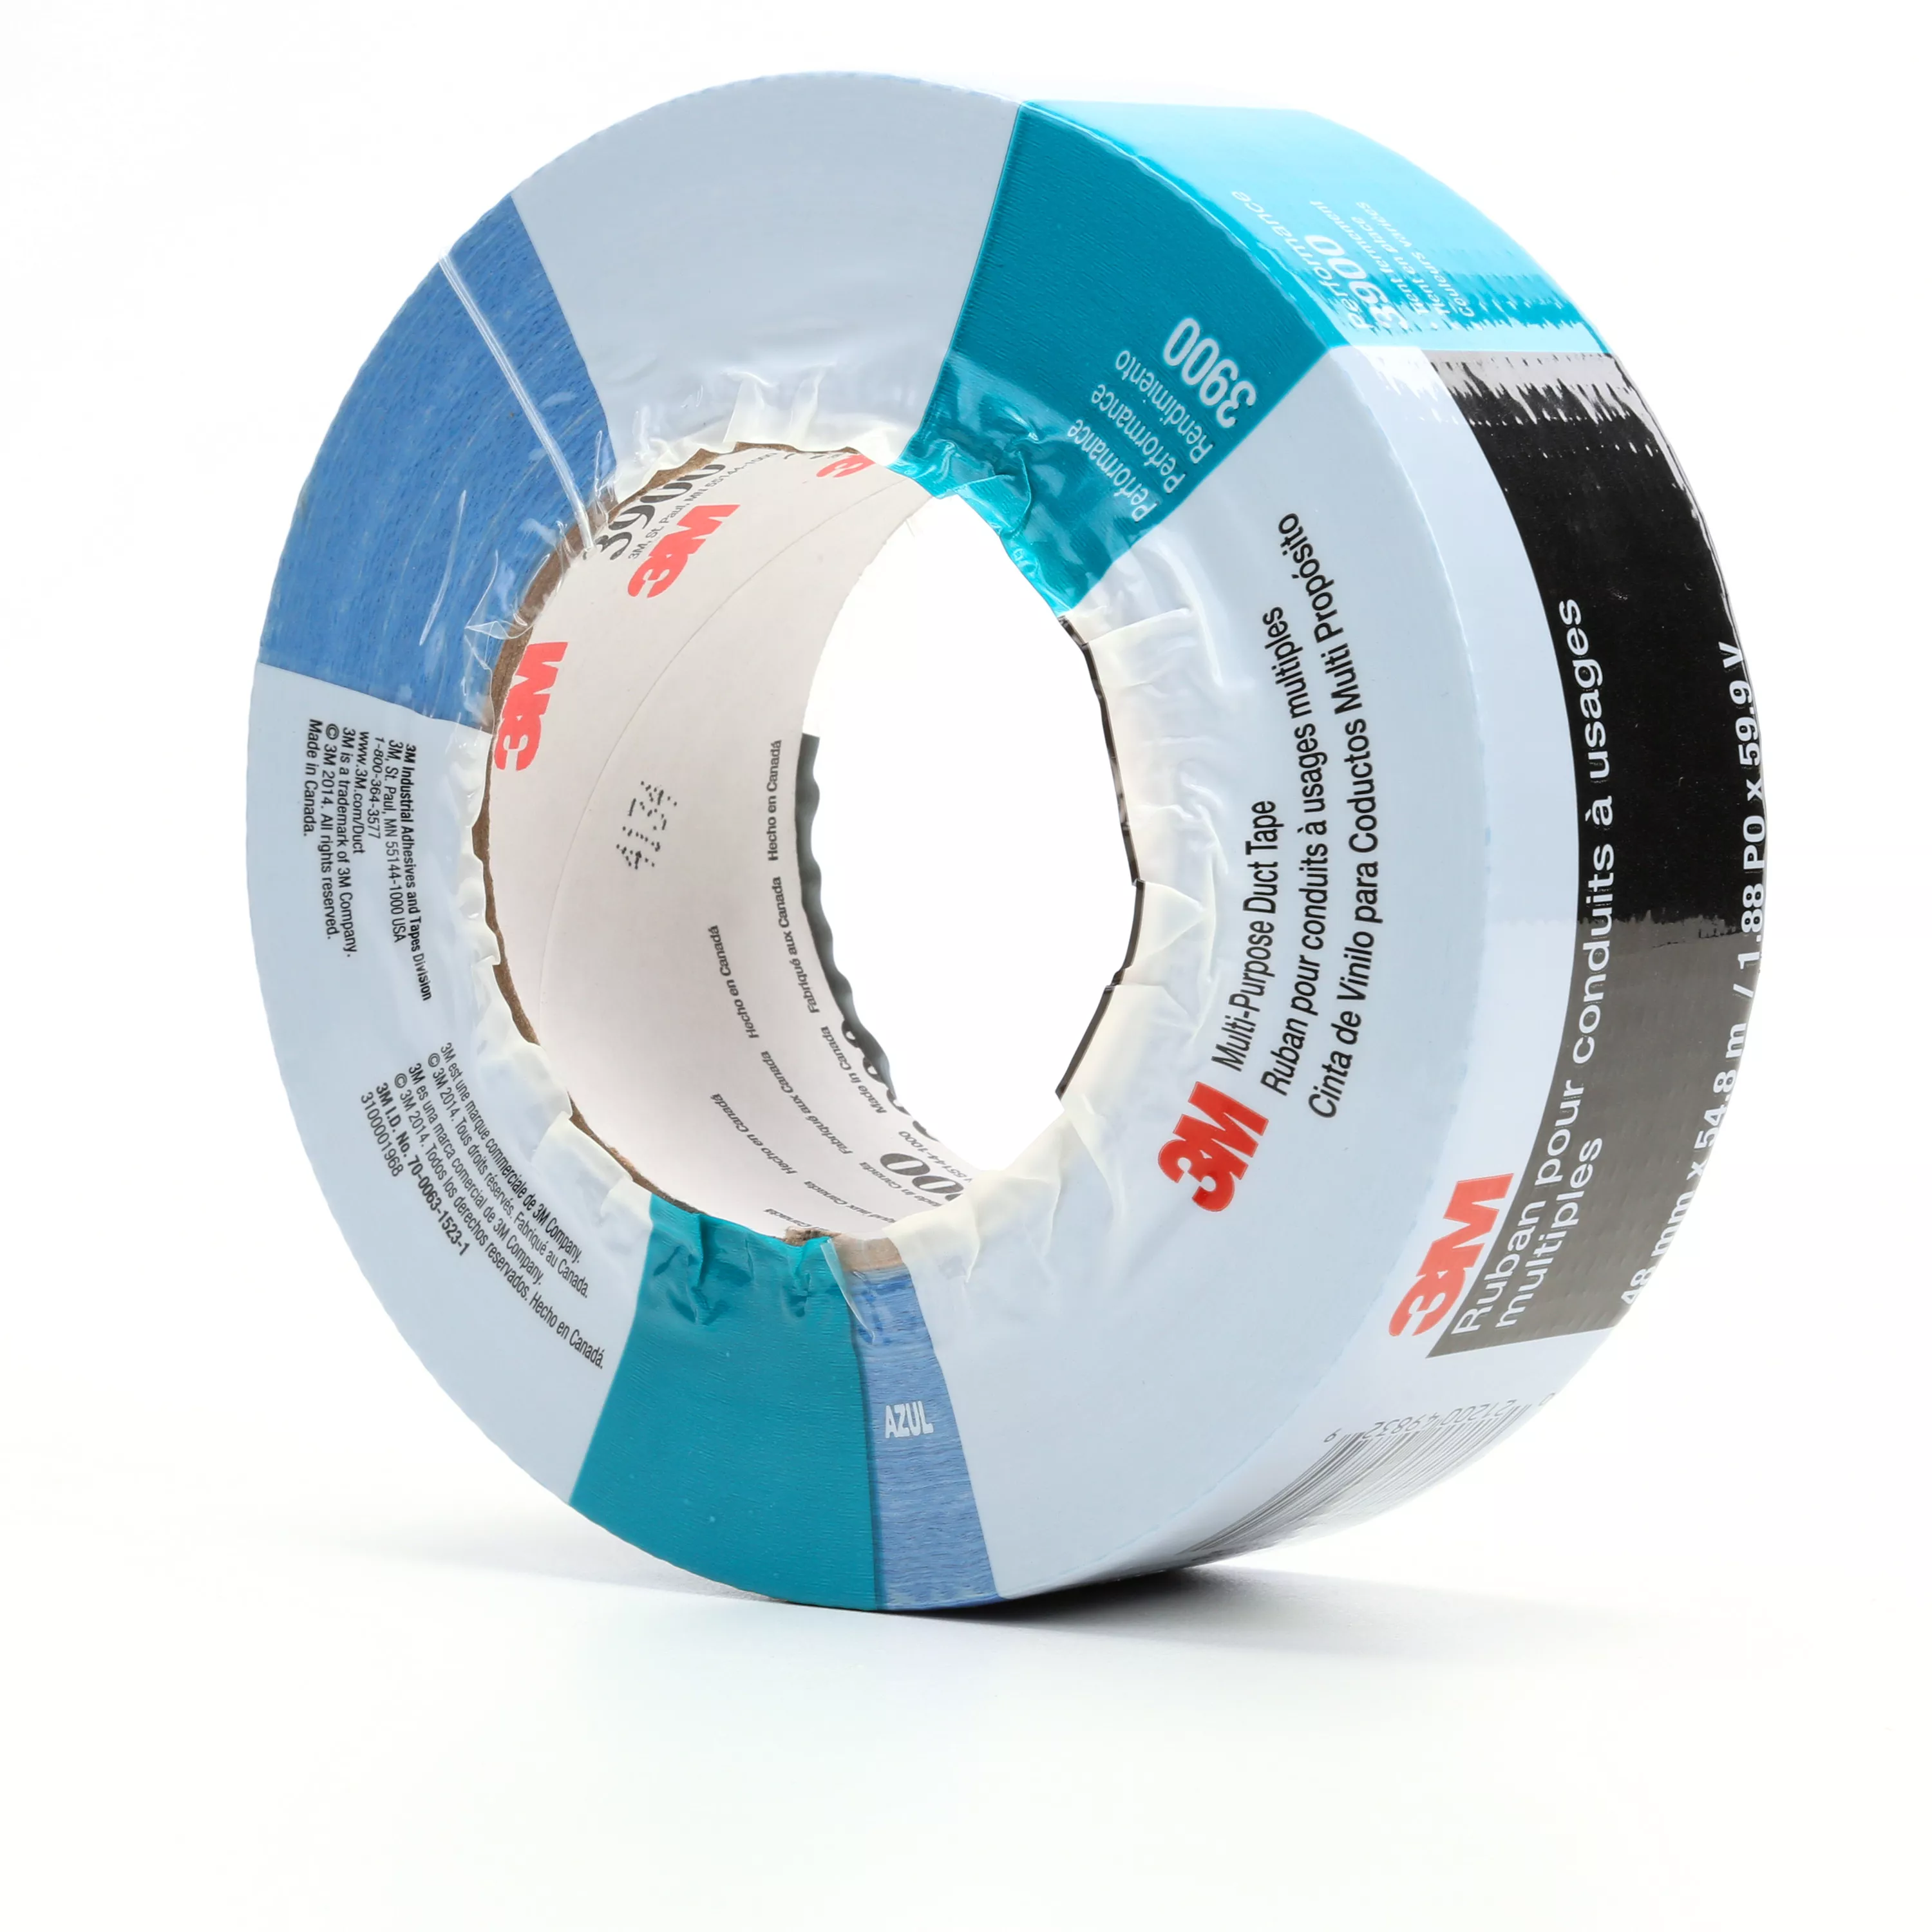 3M™ Multi-Purpose Duct Tape 3900, Blue, 48 mm x 54.8 m, 7.6 mil, 24
Roll/Case, Individually Wrapped Conveniently Packaged